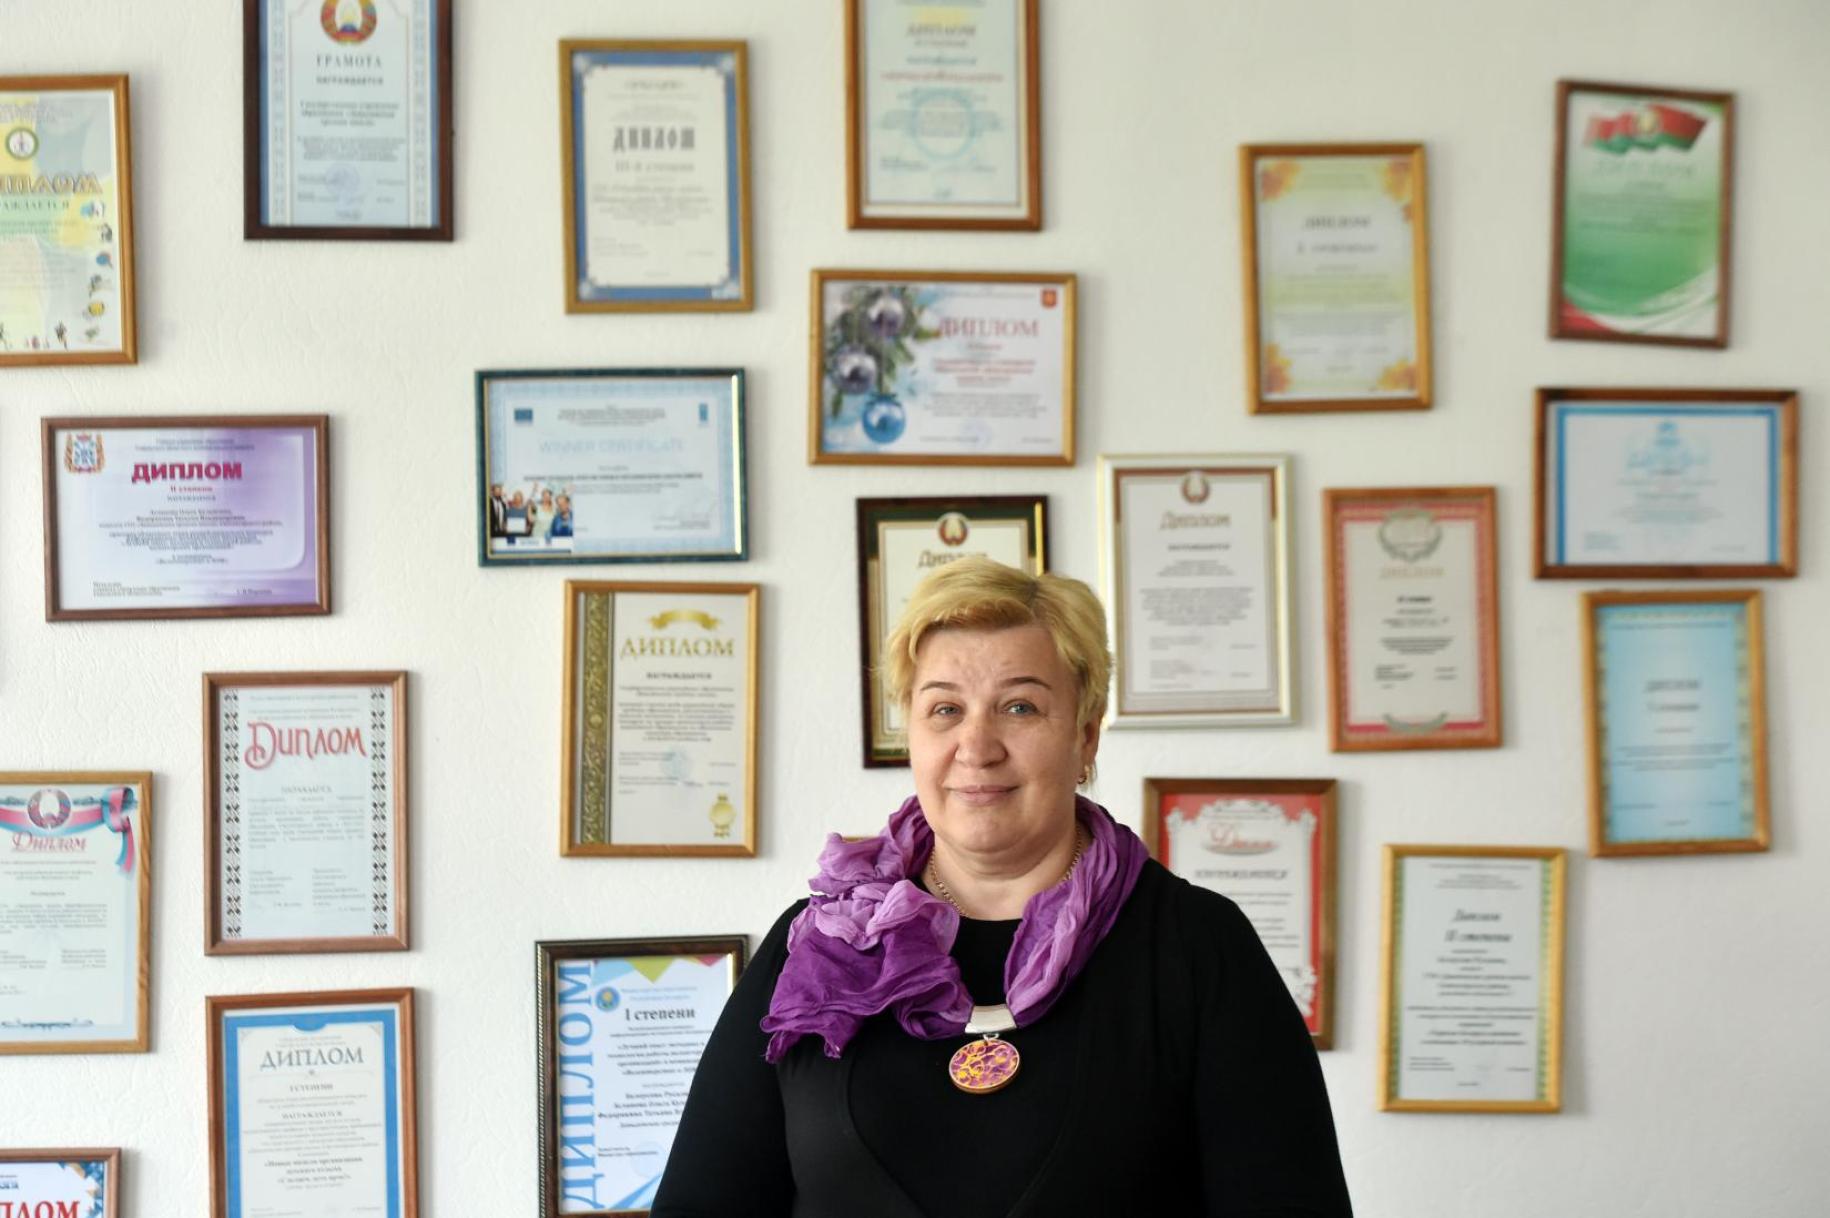 Svetlana Markevich, director of the Davydovskaya Secondary School stands proudly in front of a wall of framed certificates and diplomas.